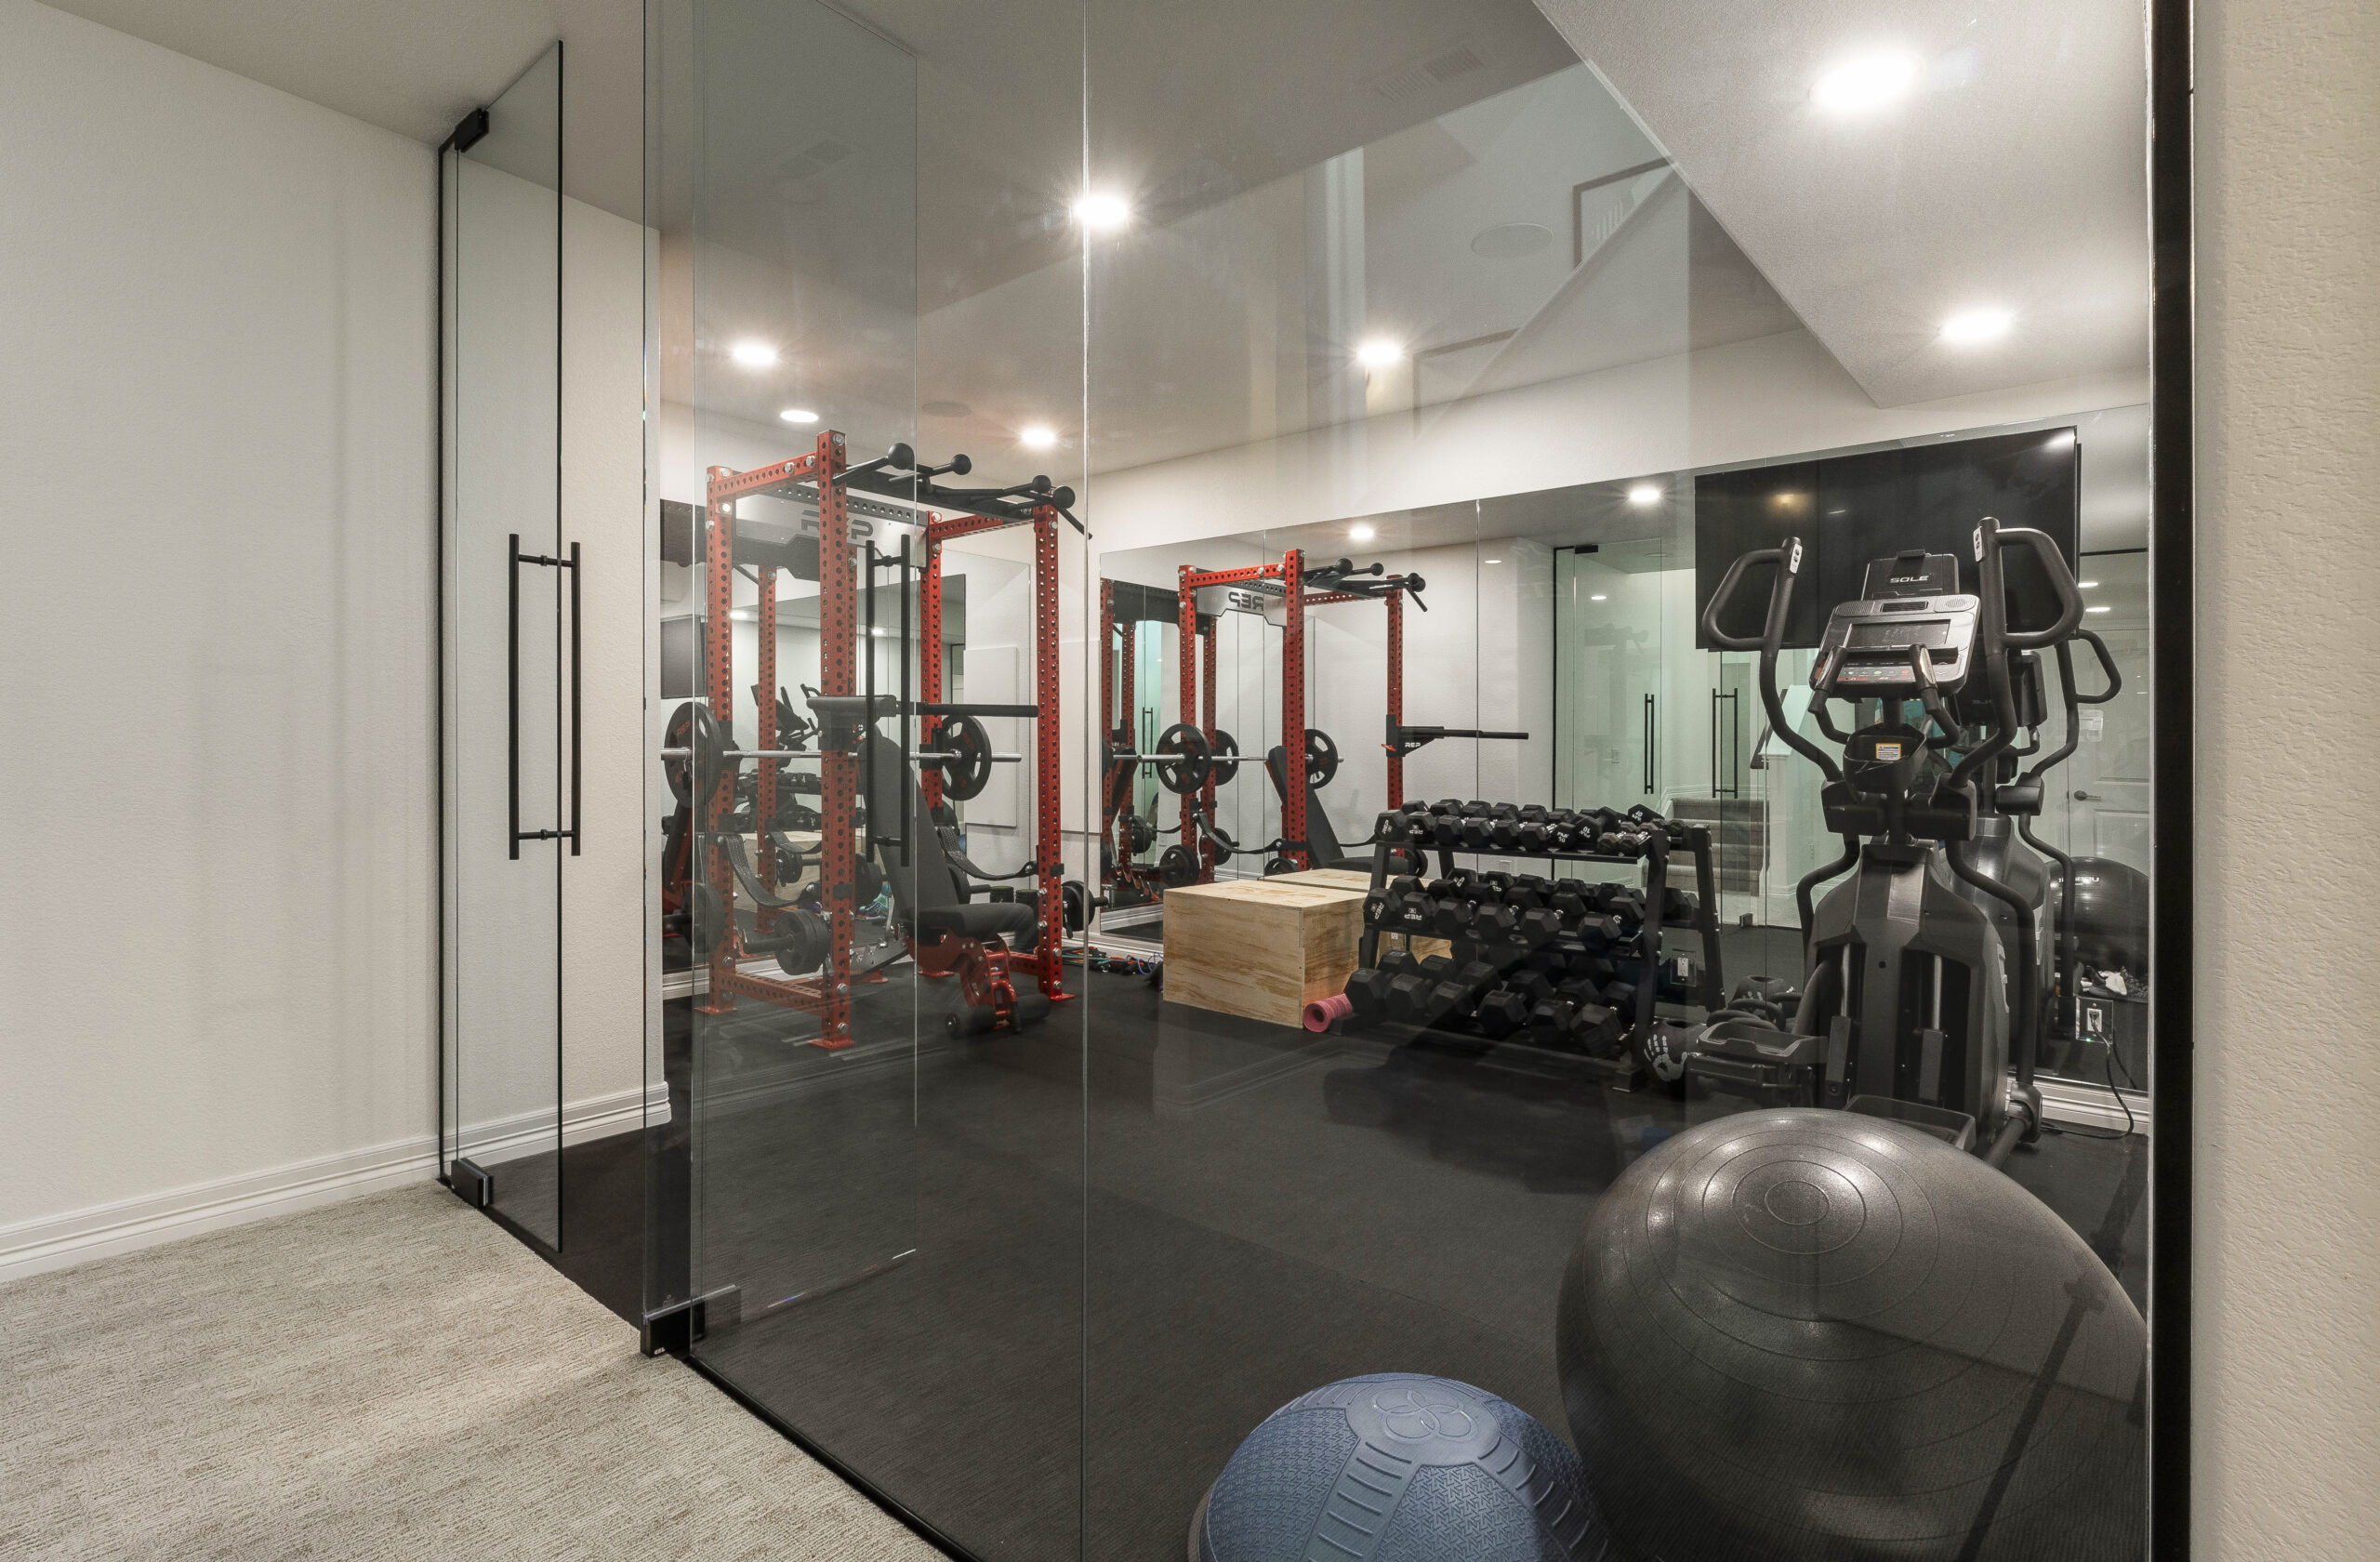 Glass-enclosed gym area with various exercise equipment, including a treadmill, weights, and a power rack, in a renovated basement.